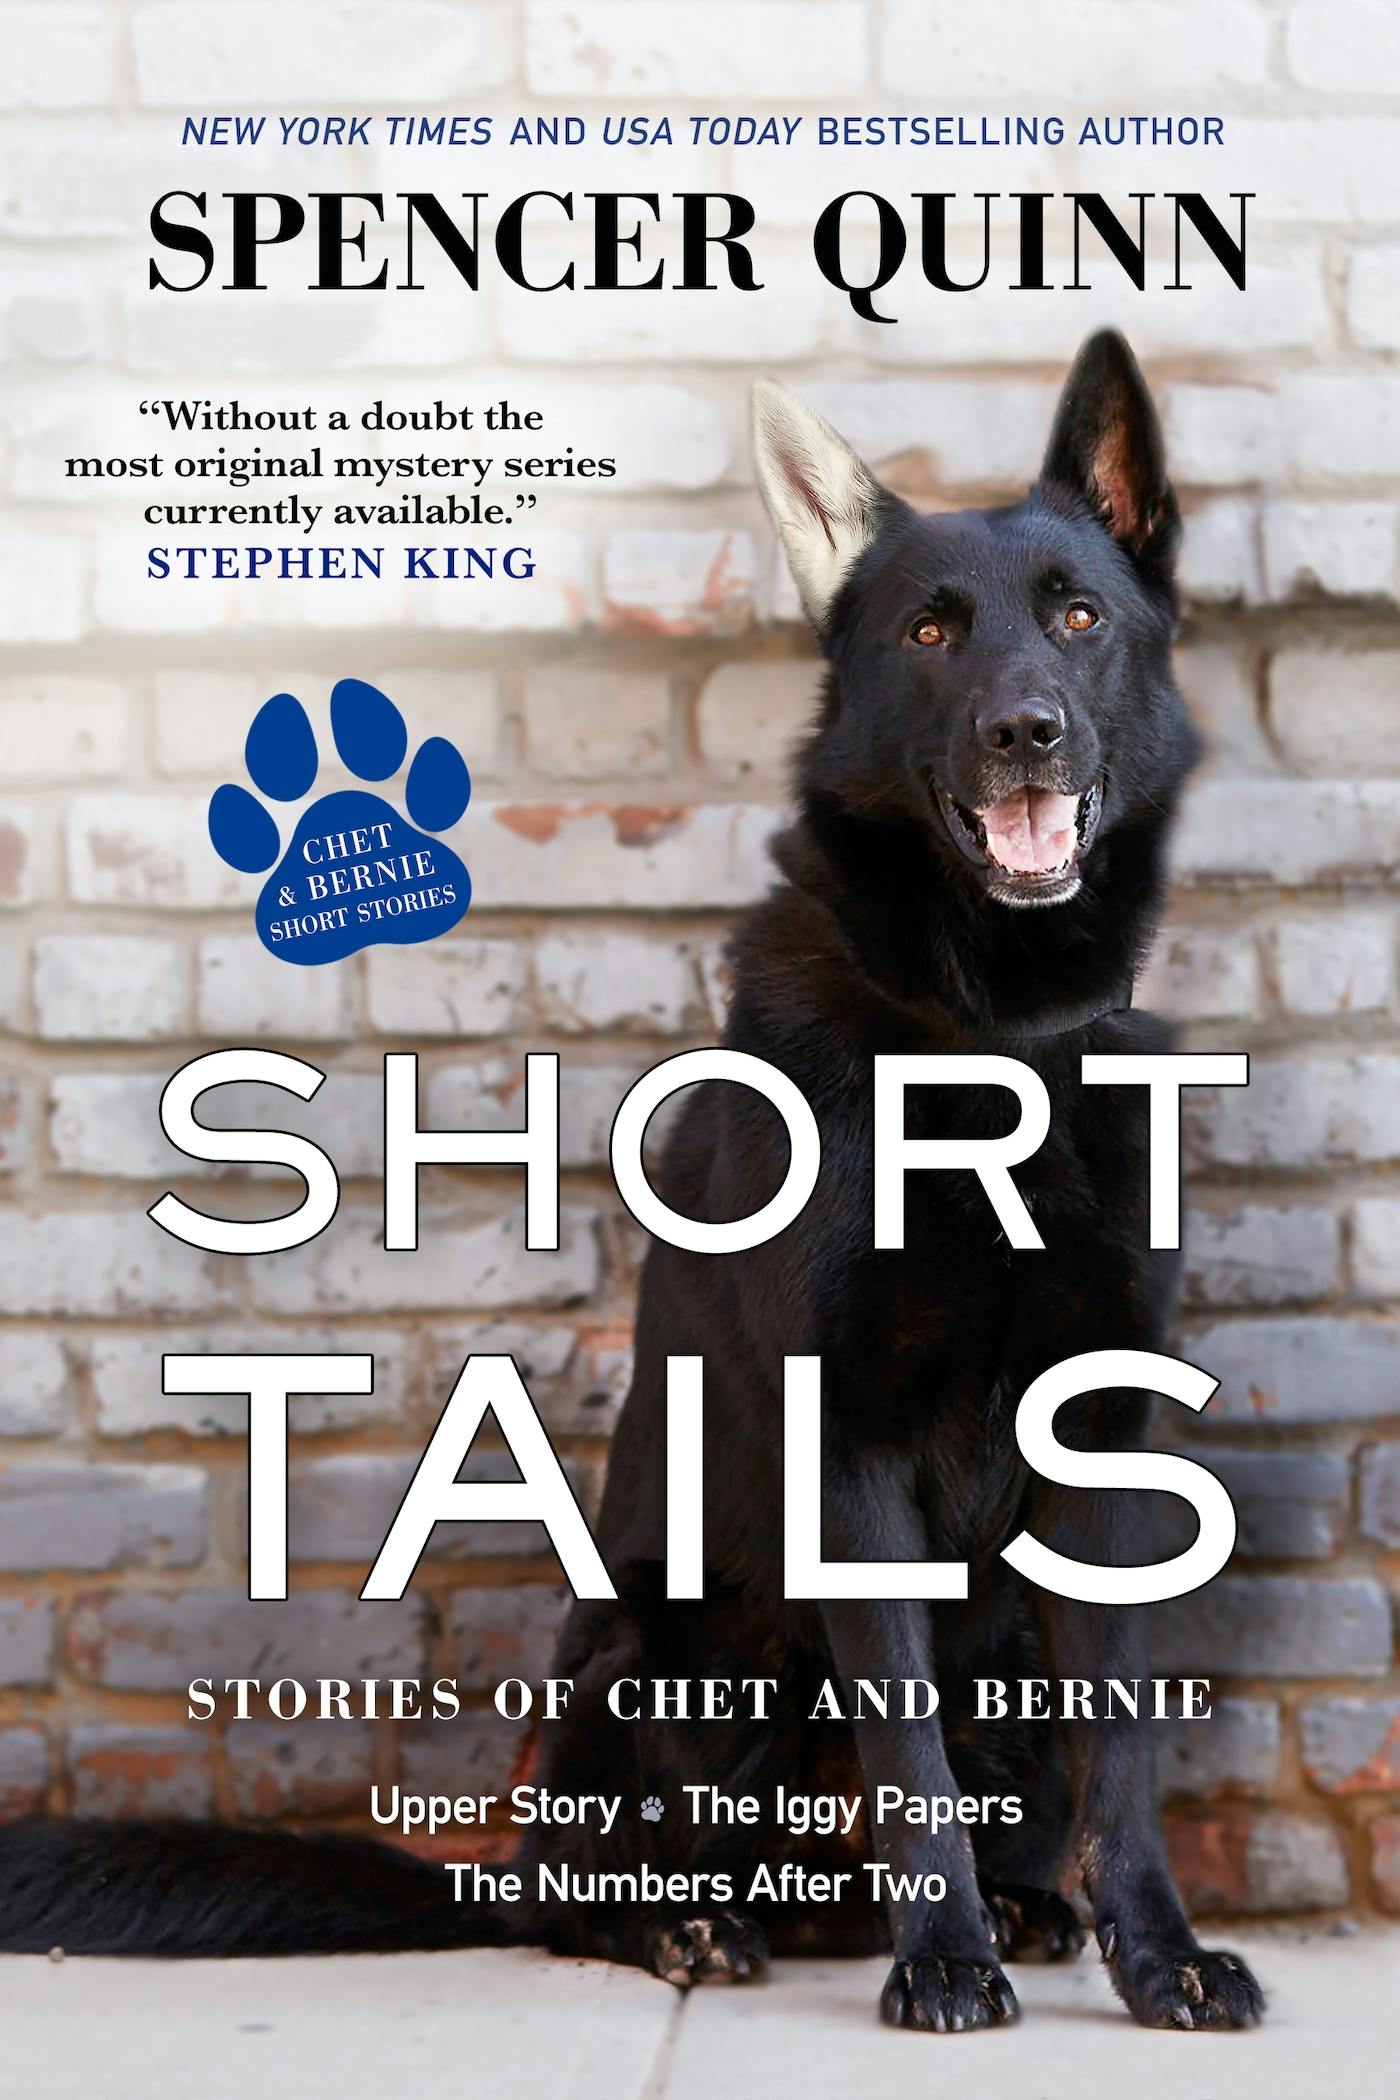 Cover for the book titled as: Short Tails